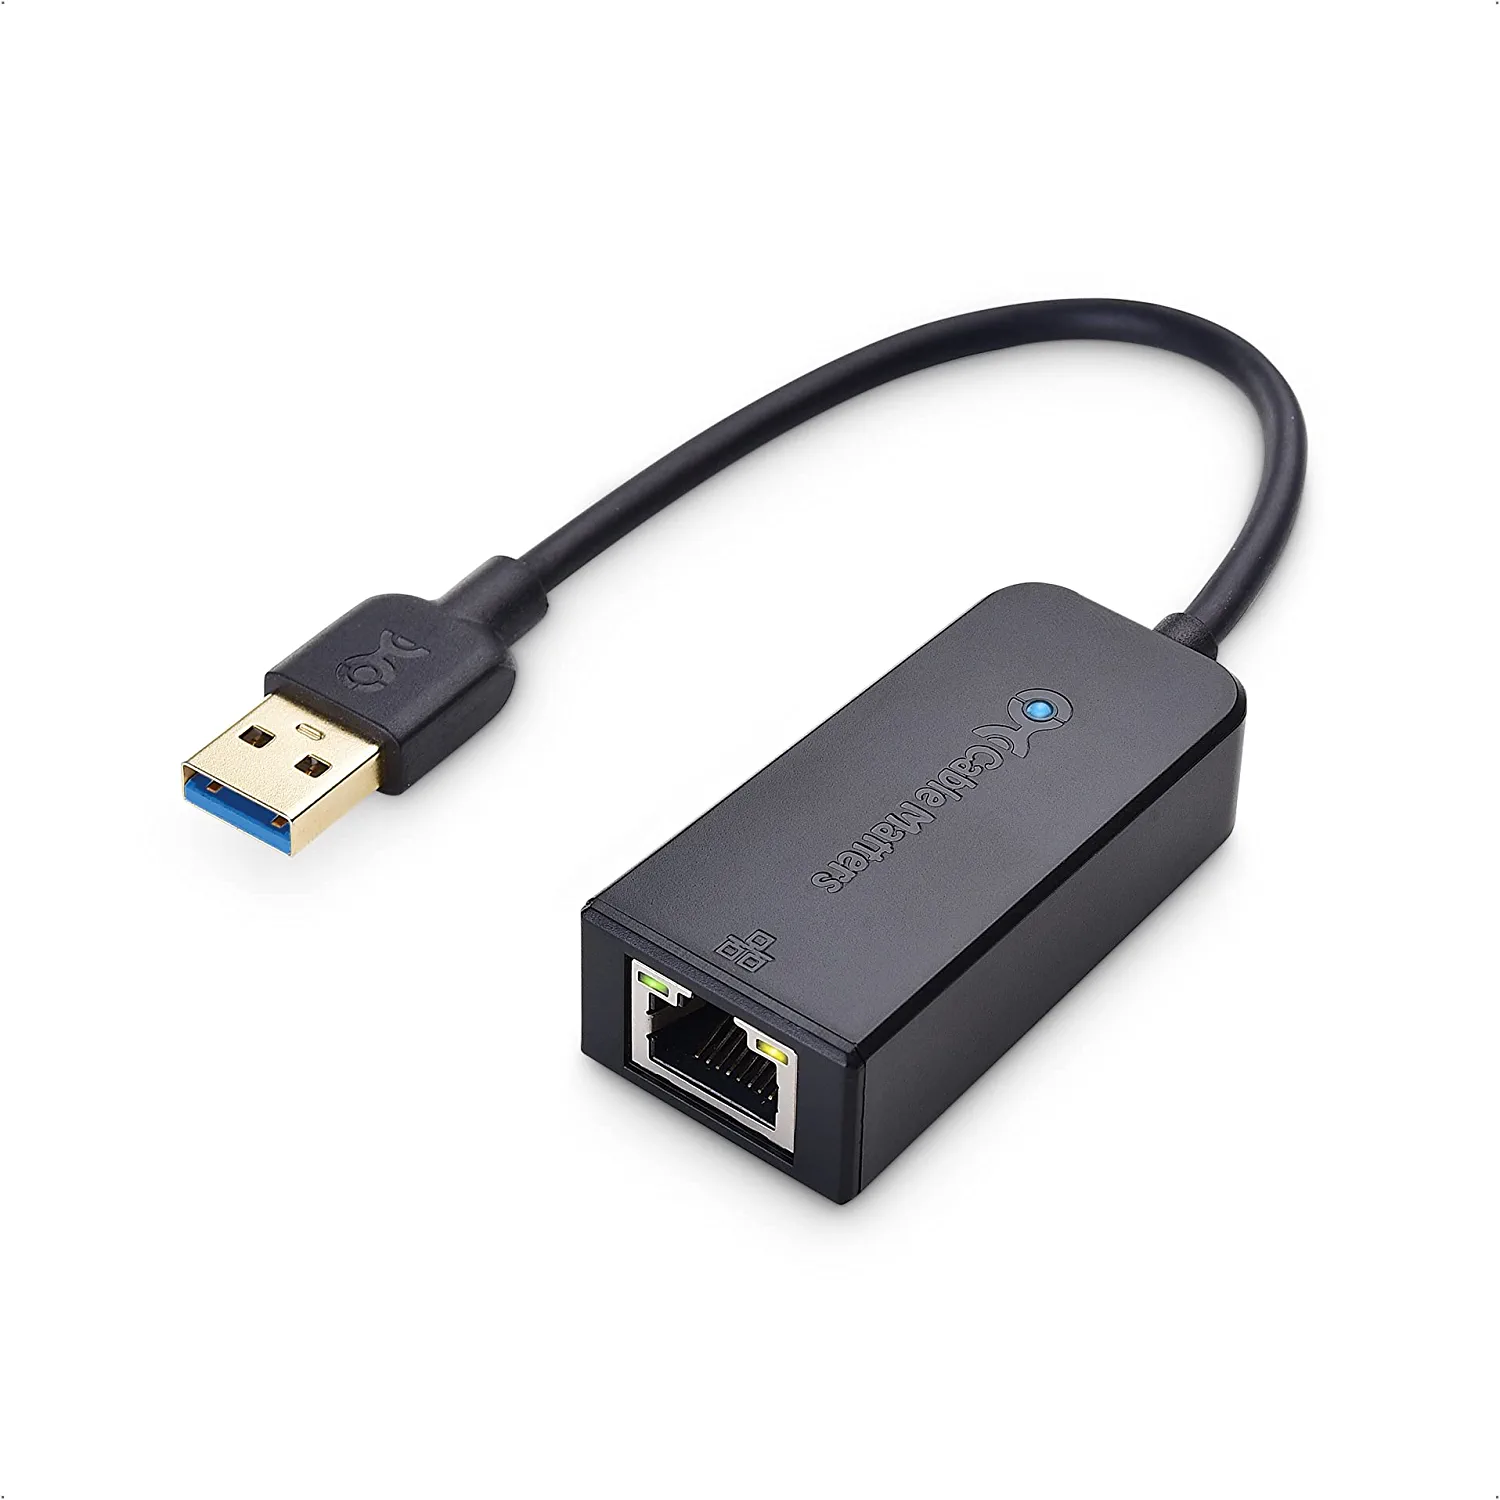 USB Ethernet Cable Adapter: